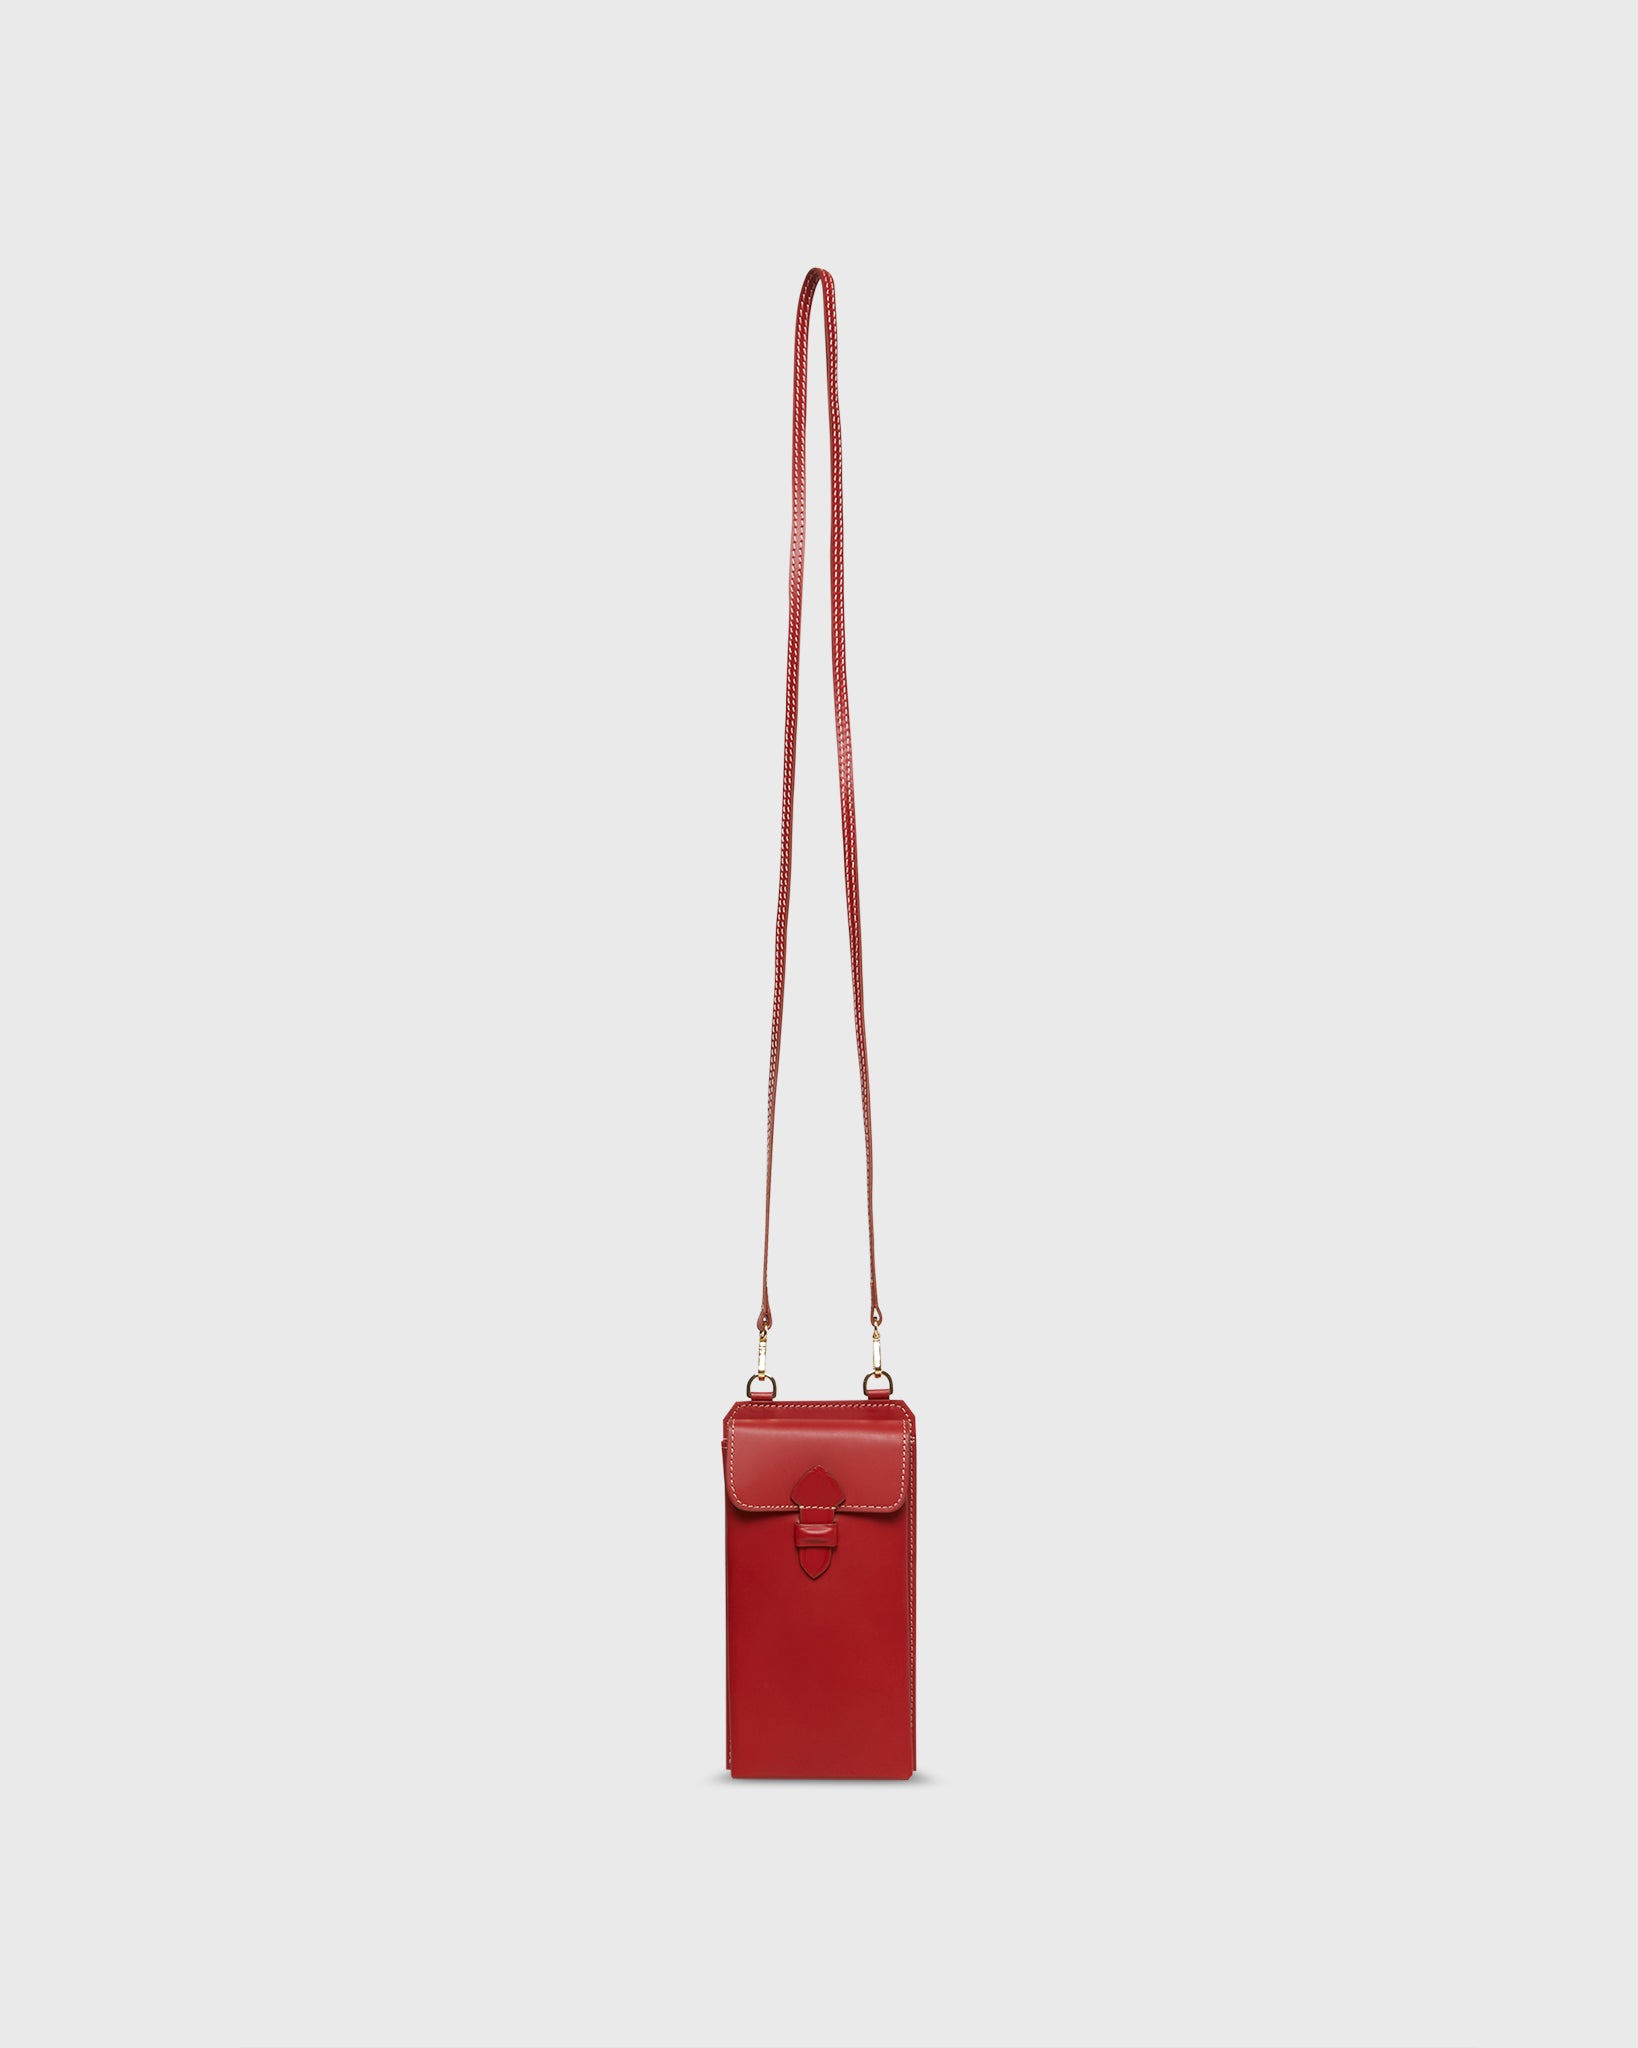 Cell Phone Bag in Red Leather